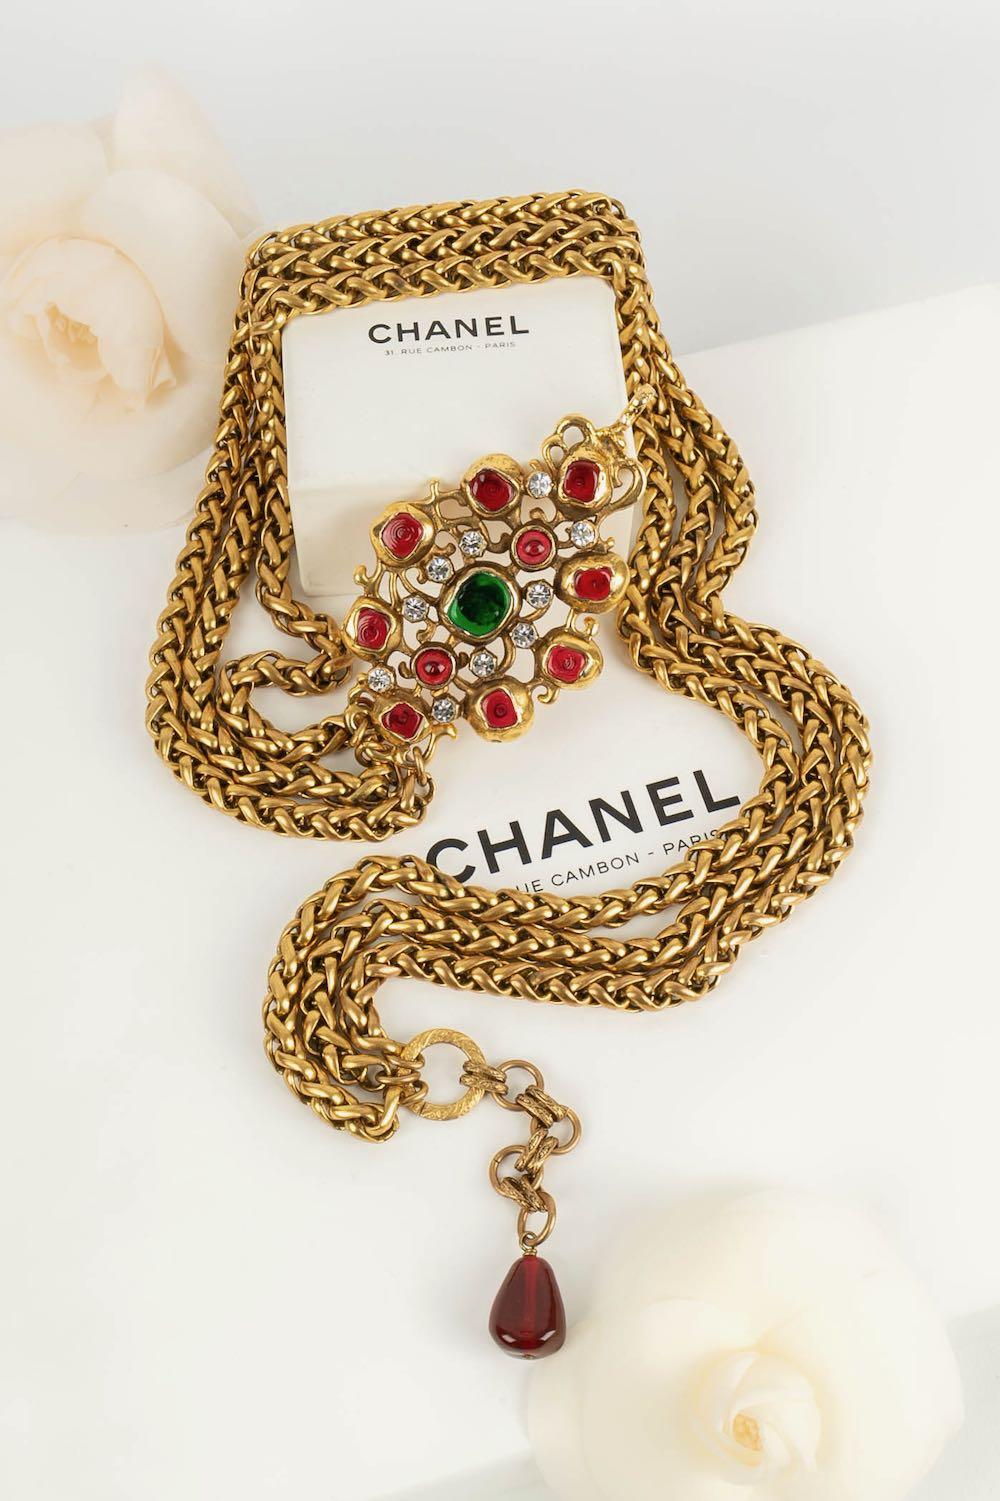 Chanel - (Made in France) Bizantine style belt in gold metal and colored glass paste.

Additional information:
Condition: Very good condition
Dimensions: Length: from 70 cm to 75 cm - Dimensions of the medallion: 5 cm x 8.5 cm

Seller Reference: